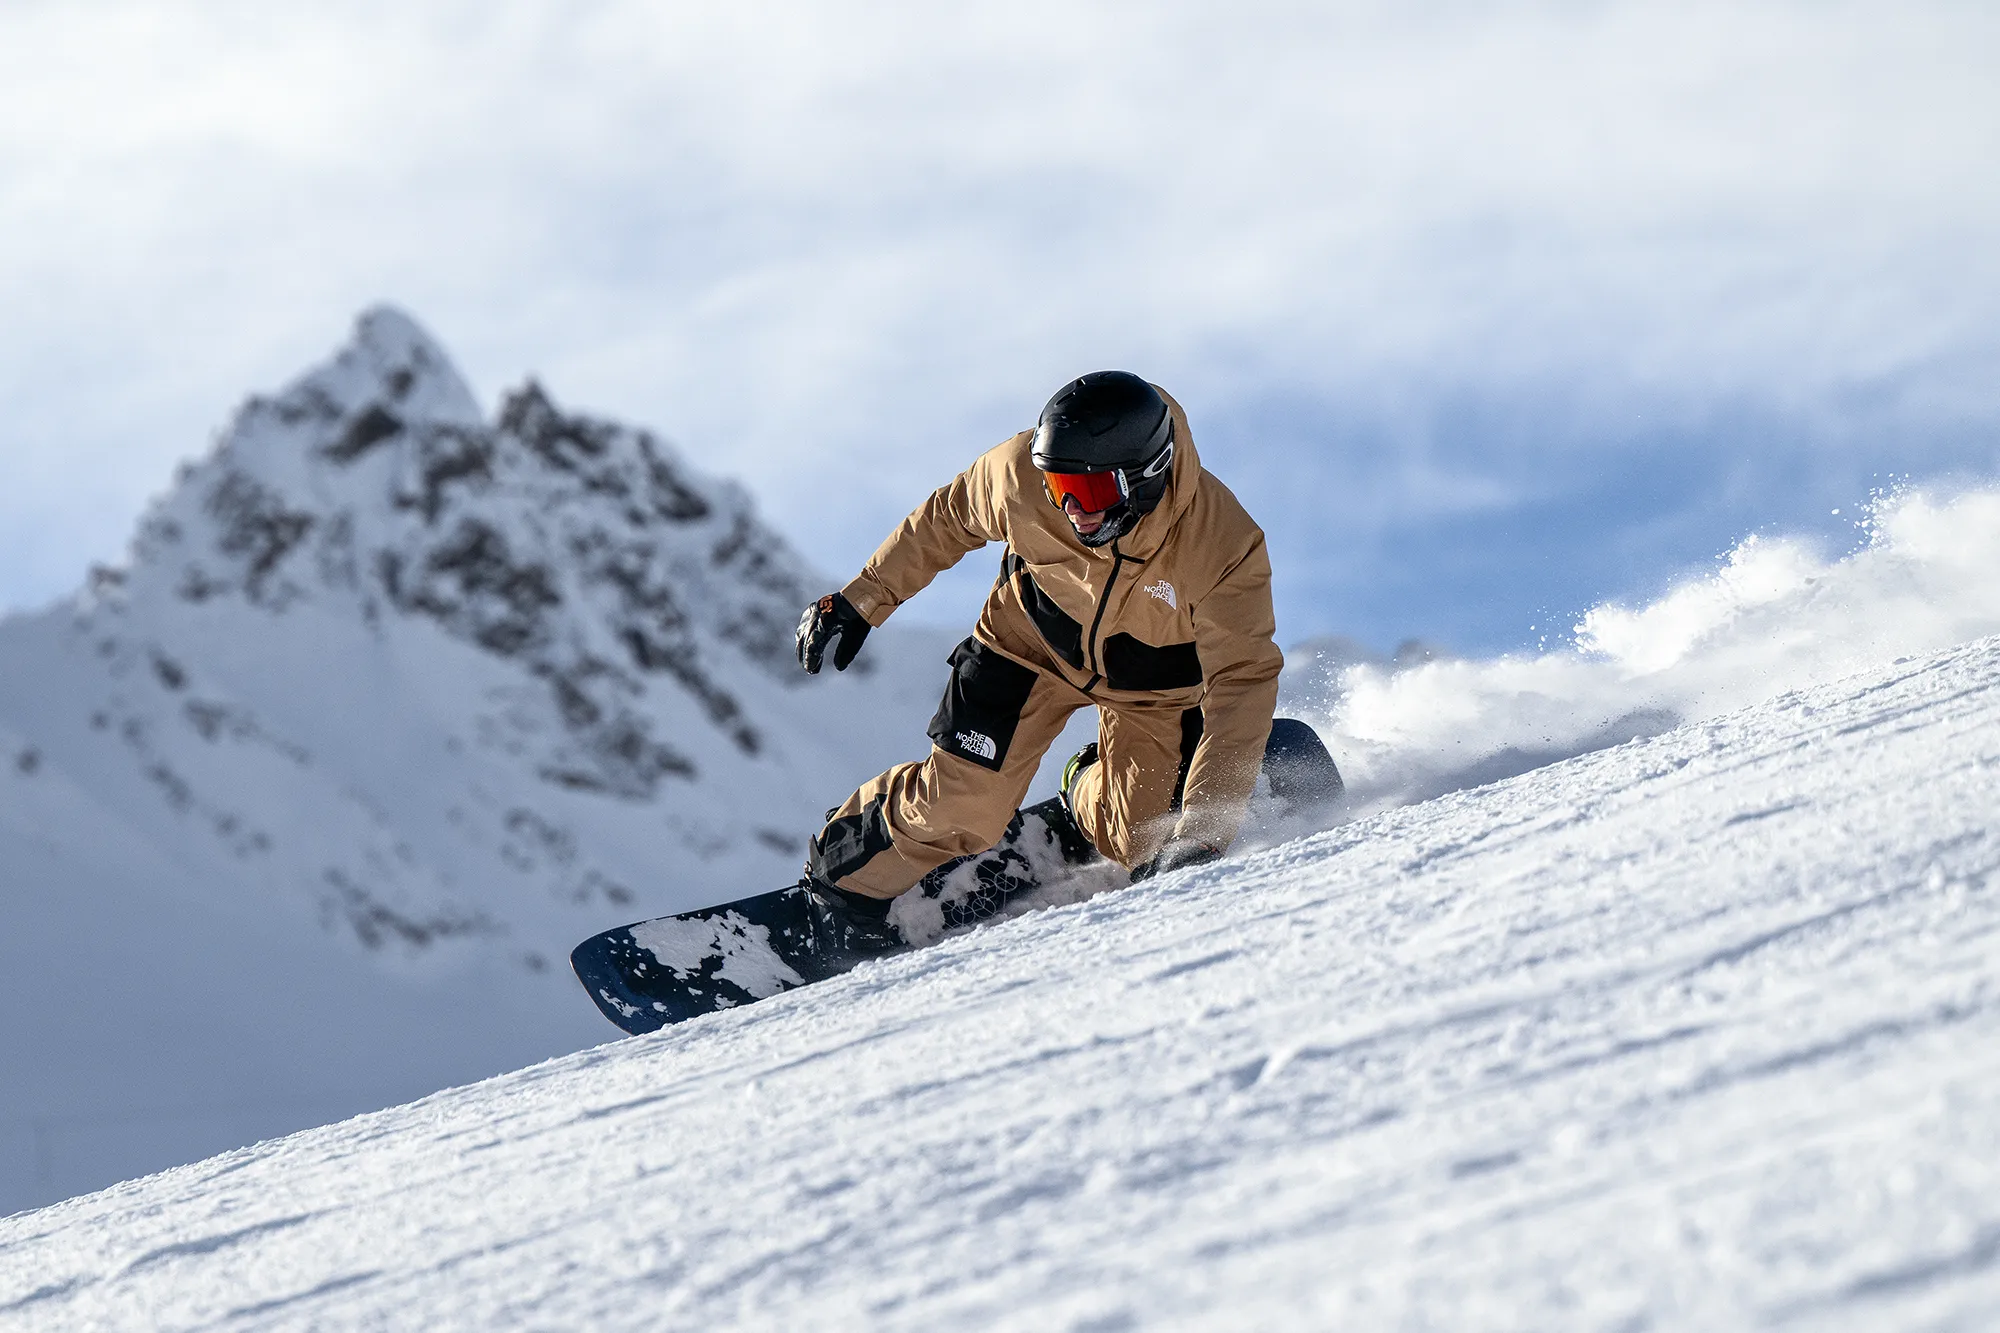 A Snowboarder making a carved turn in a snowboard lesson